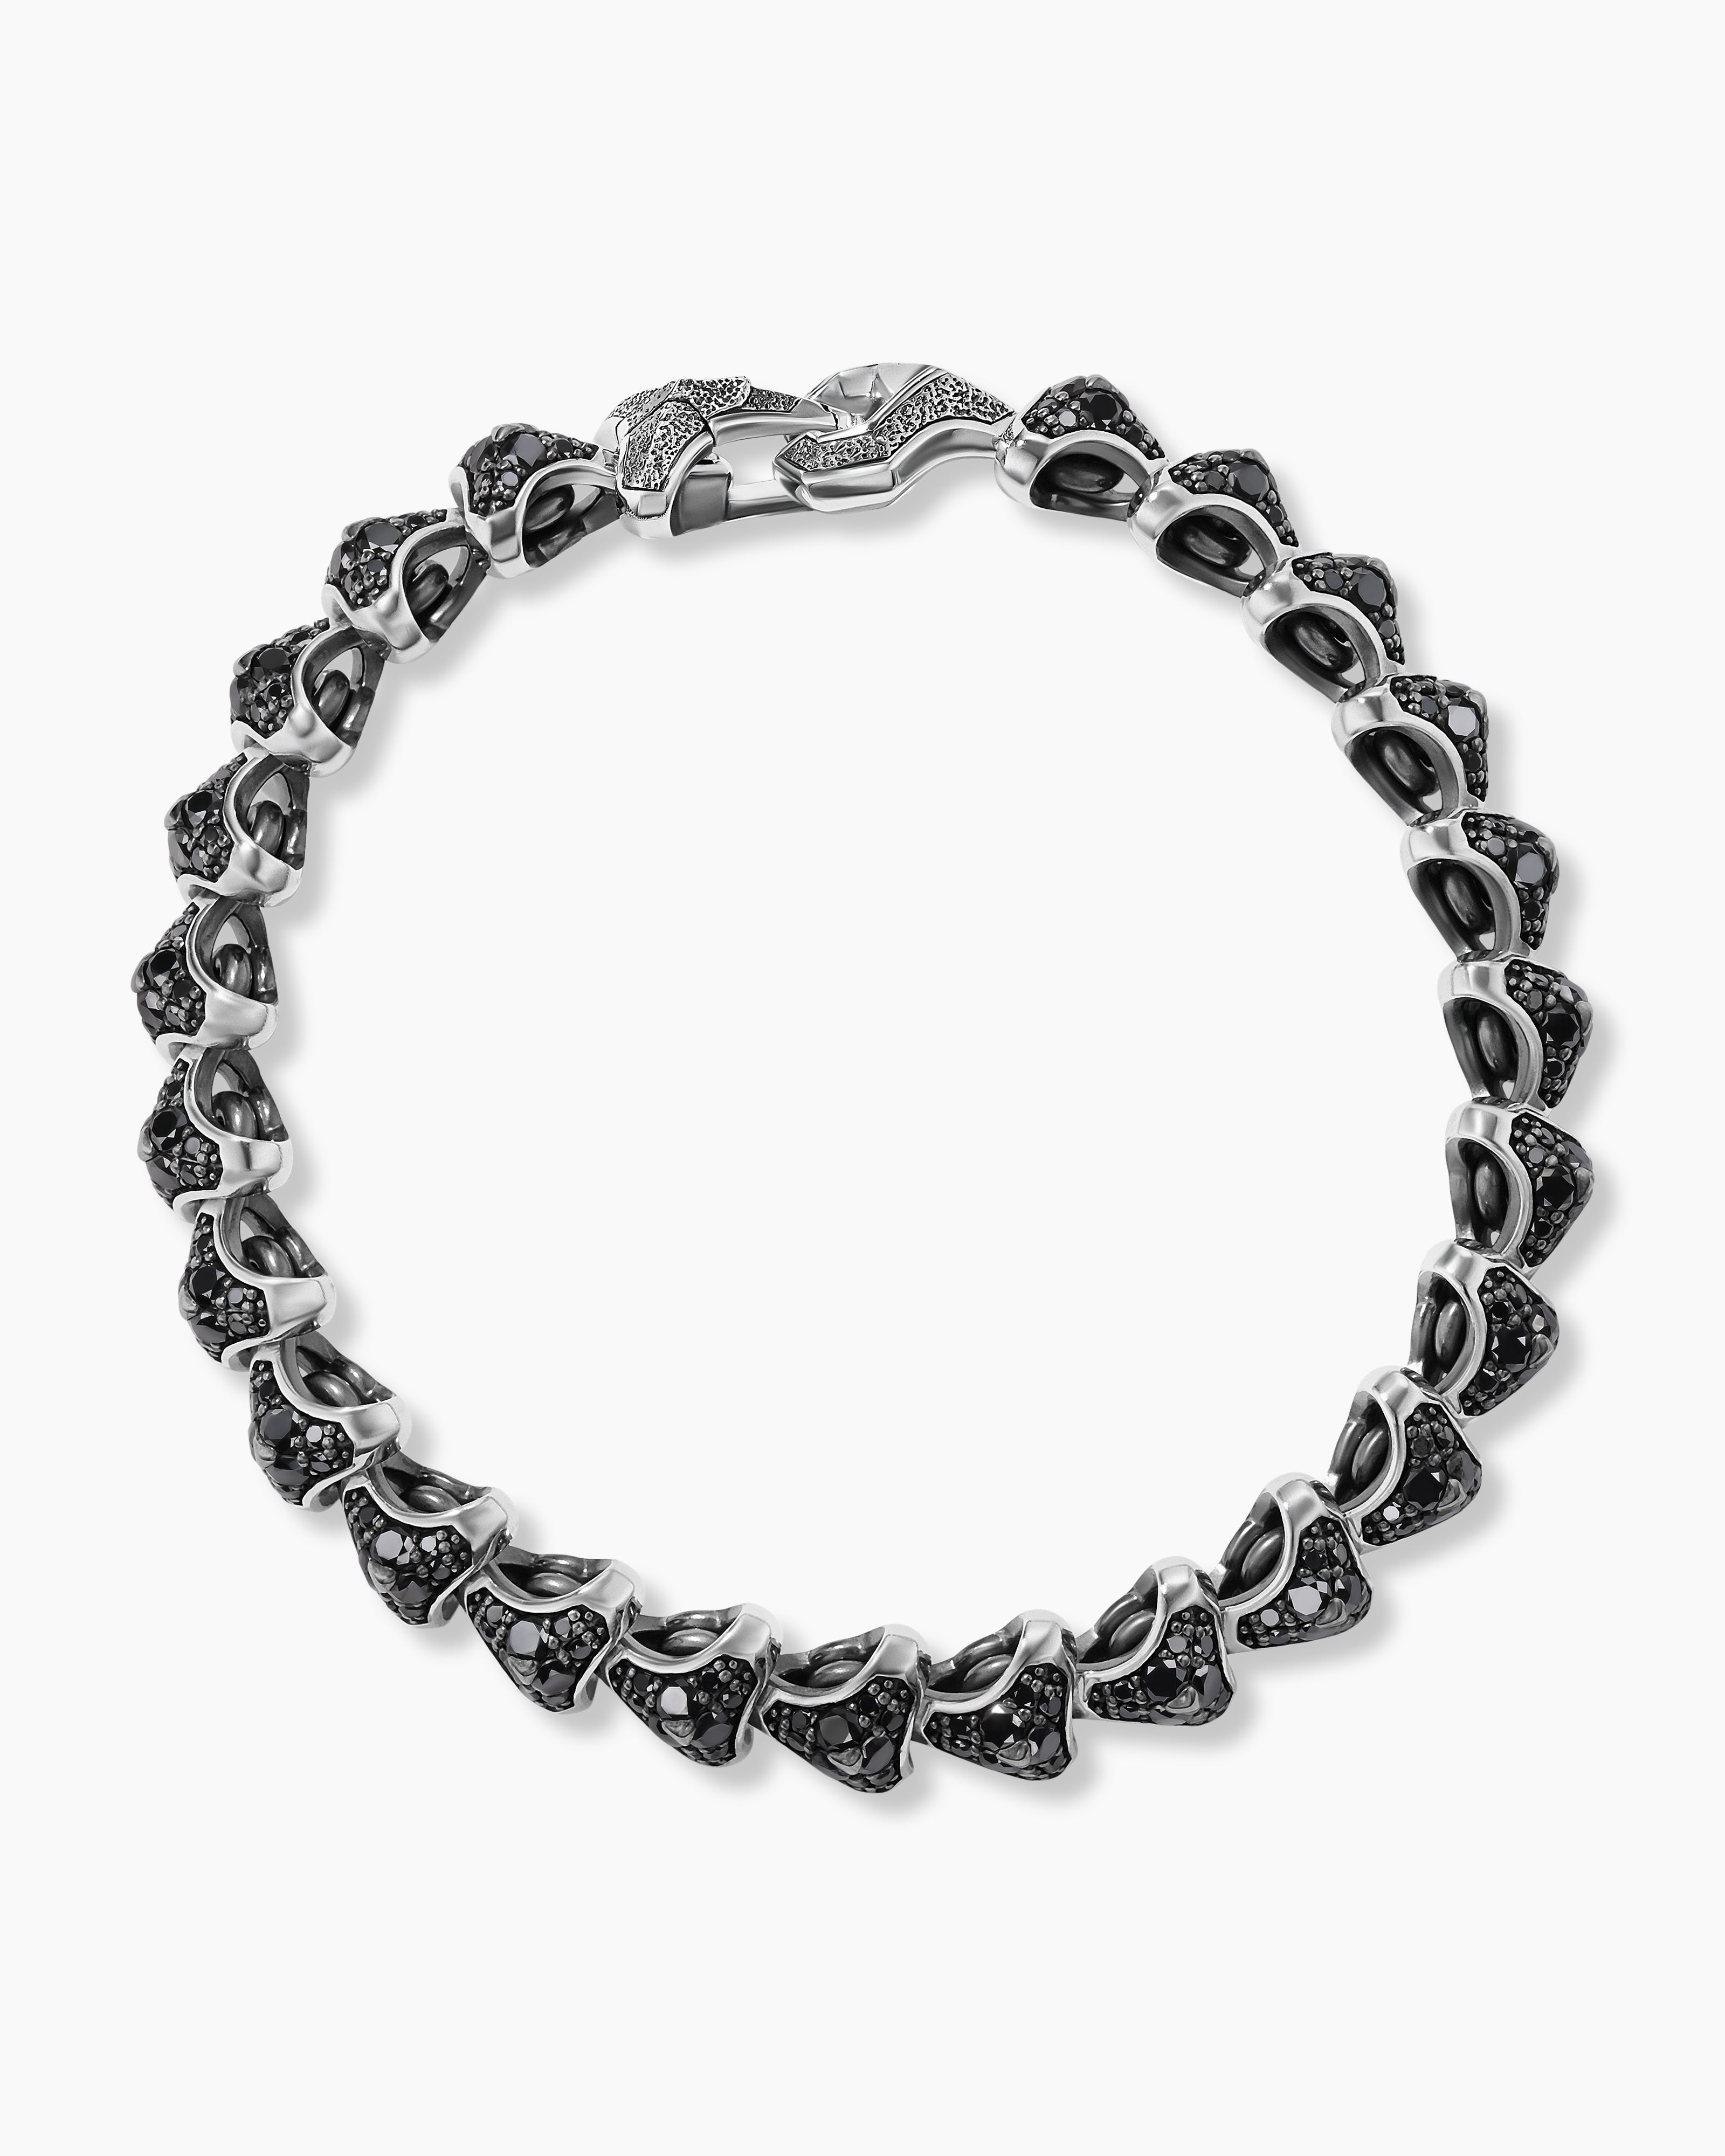 92.5 Silver With Marcasite Stones Bracelet For Girls - Silver Palace